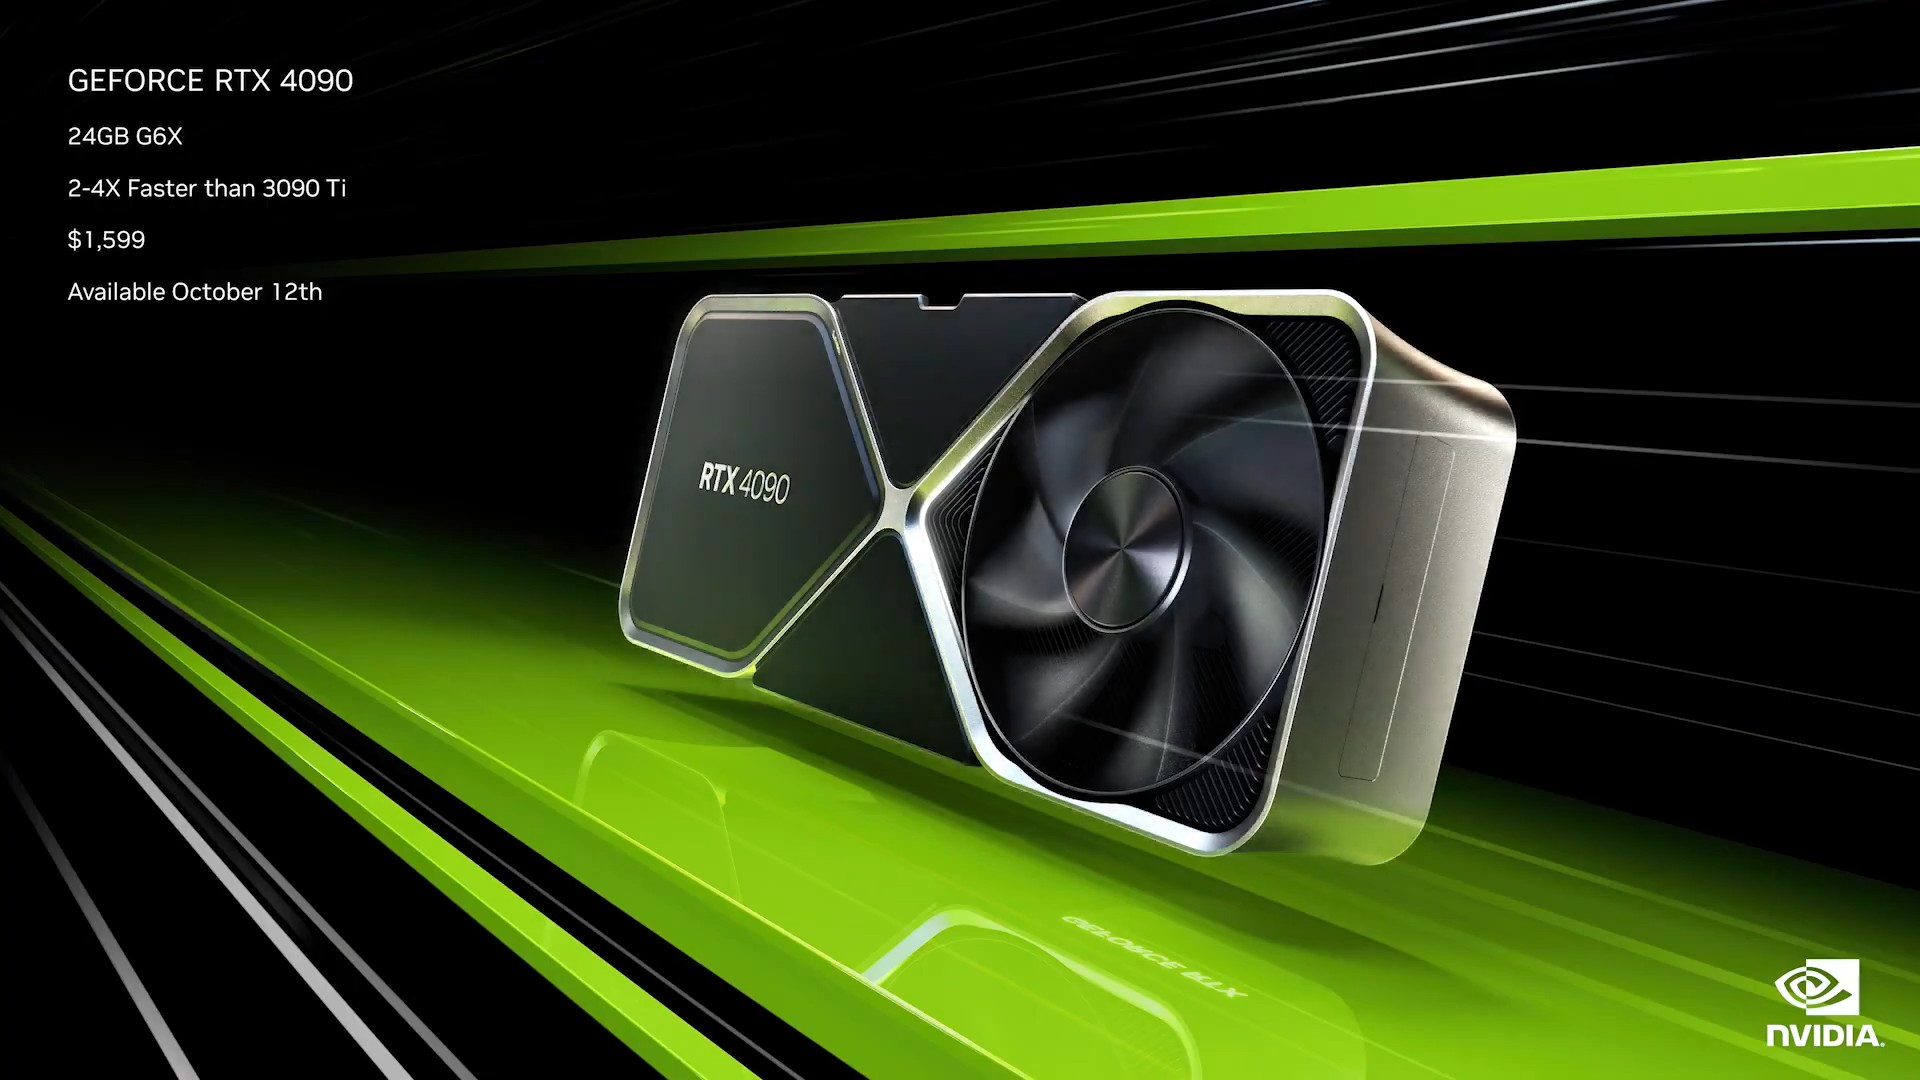 The new RTX 40 series are here. NVIDIA CEO Jensen Huang has now officially introduced RTX 4090, RTX 4080 16GB and RTX 4080 12GB models, the first SKUs